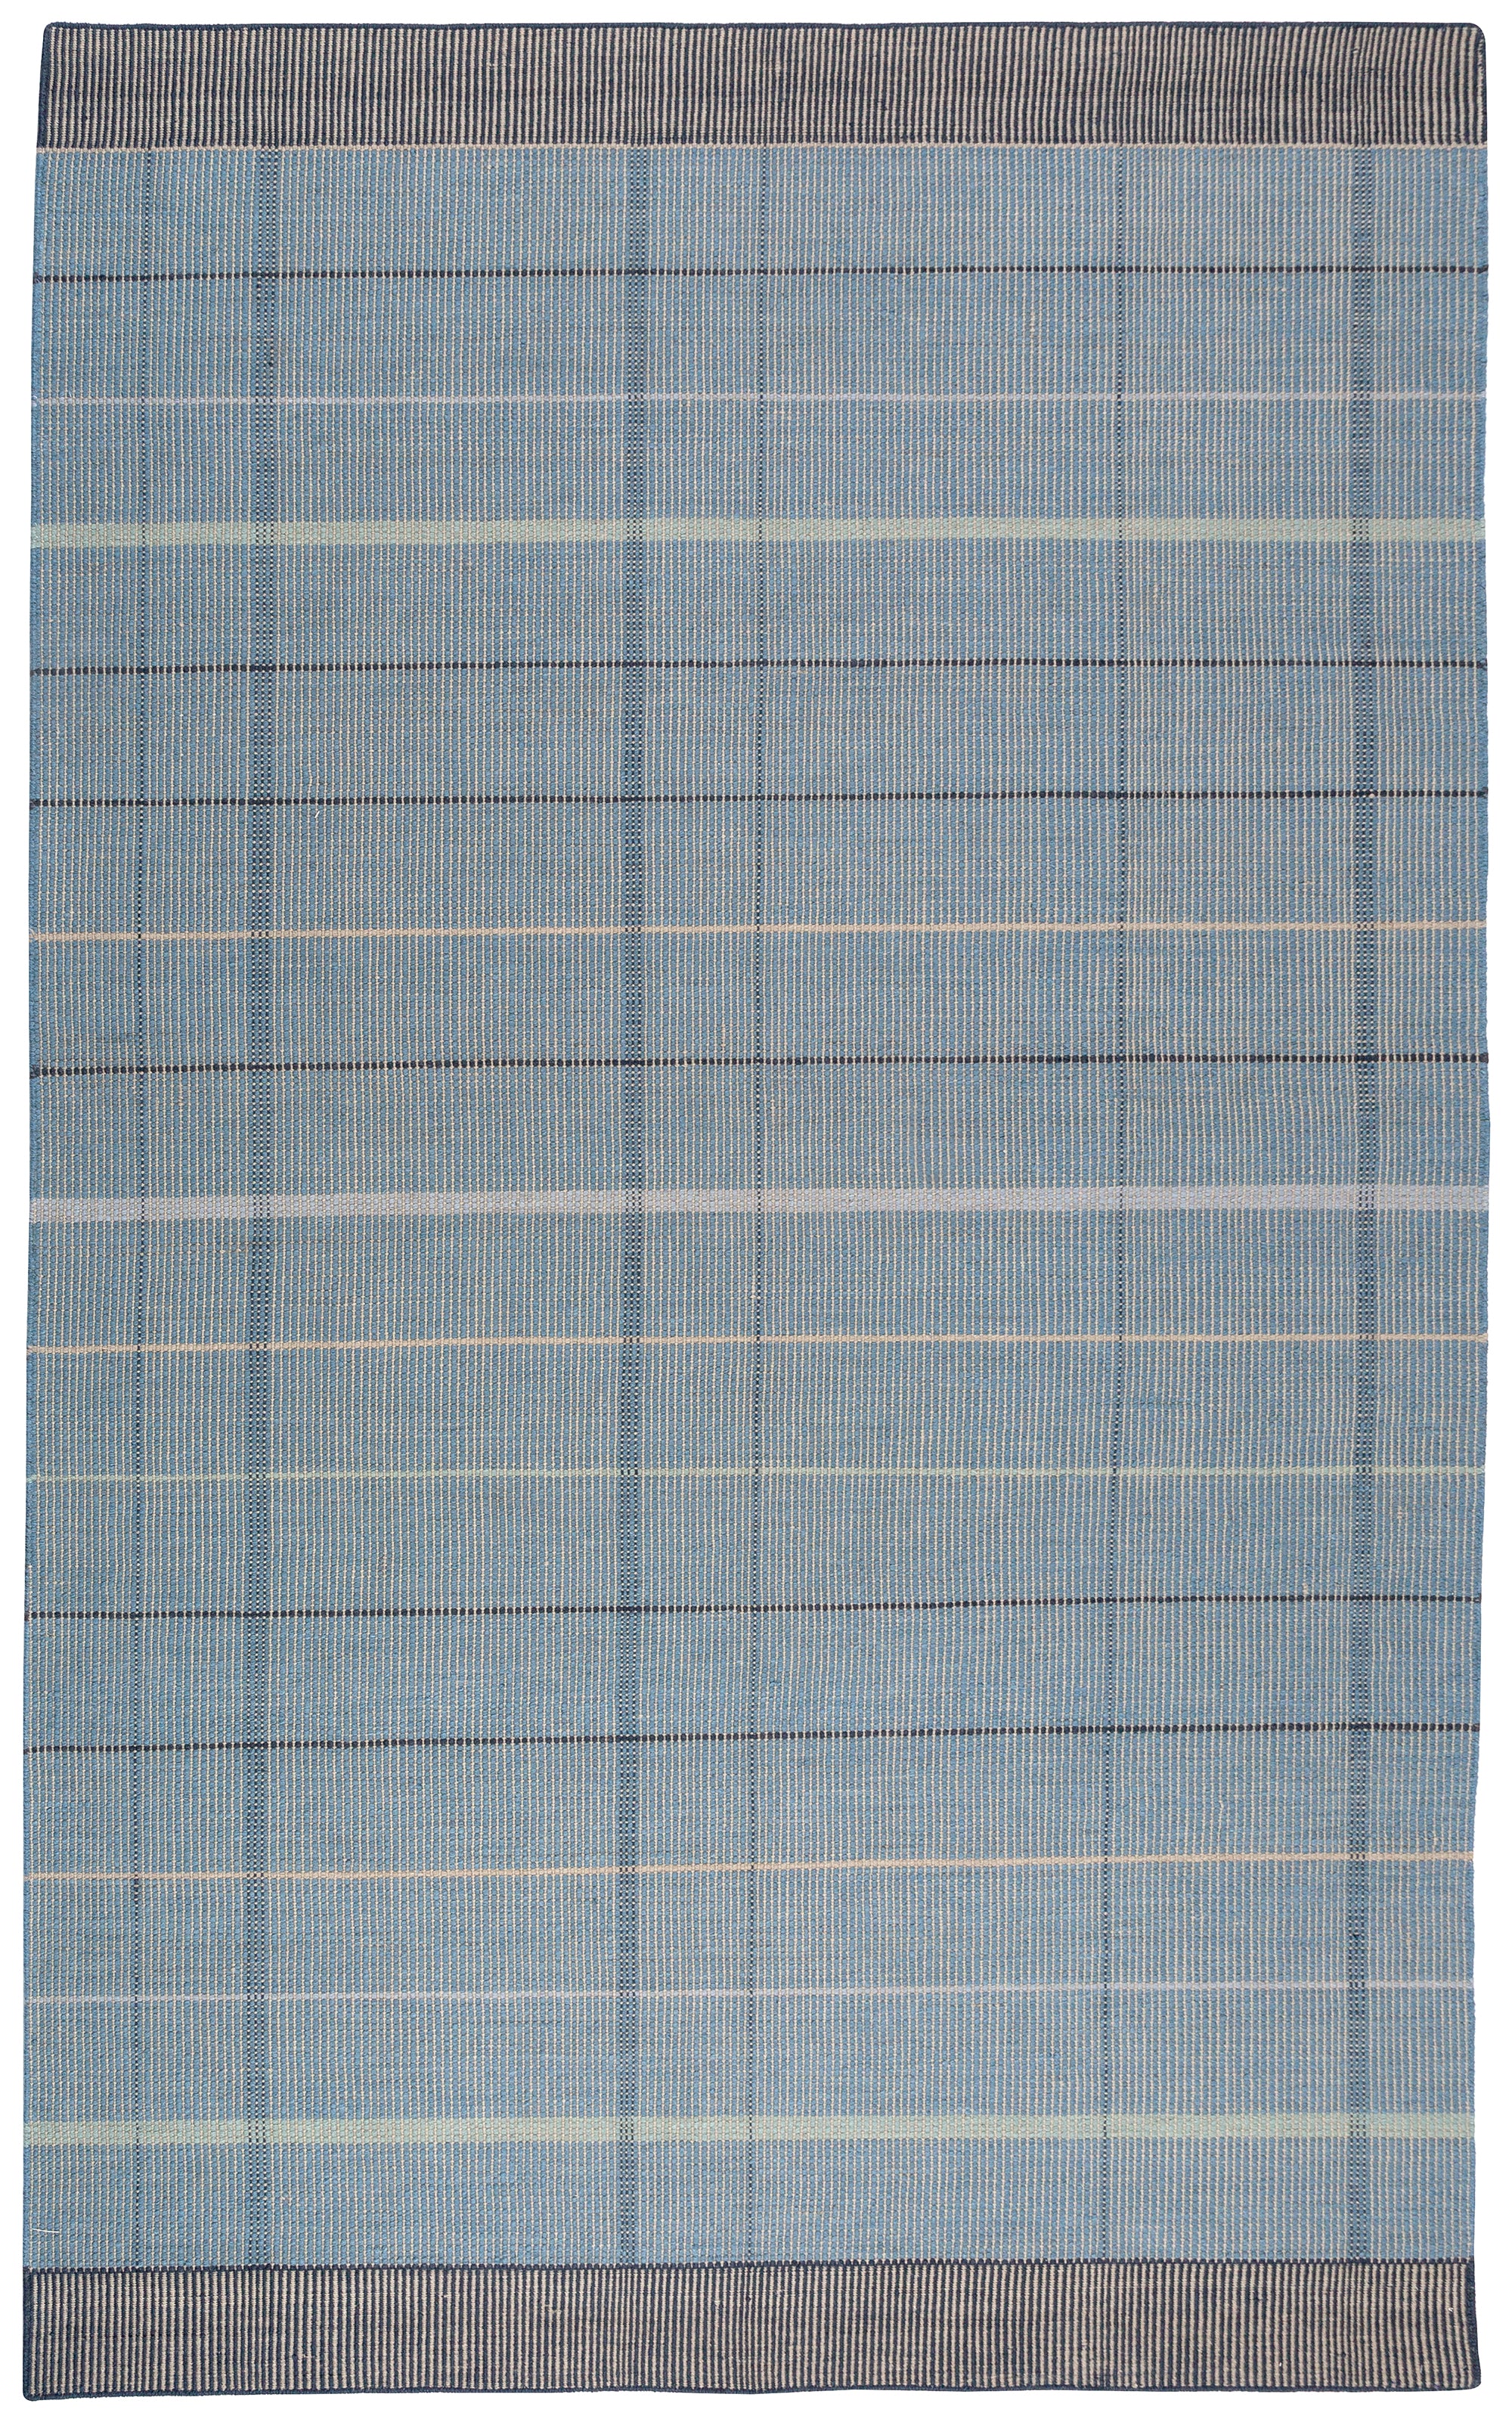 Full size Jasper Waffle Rug in Chalcedony, a large scale plaid pattern of denim blue, black, yellow and pale turqouise. 